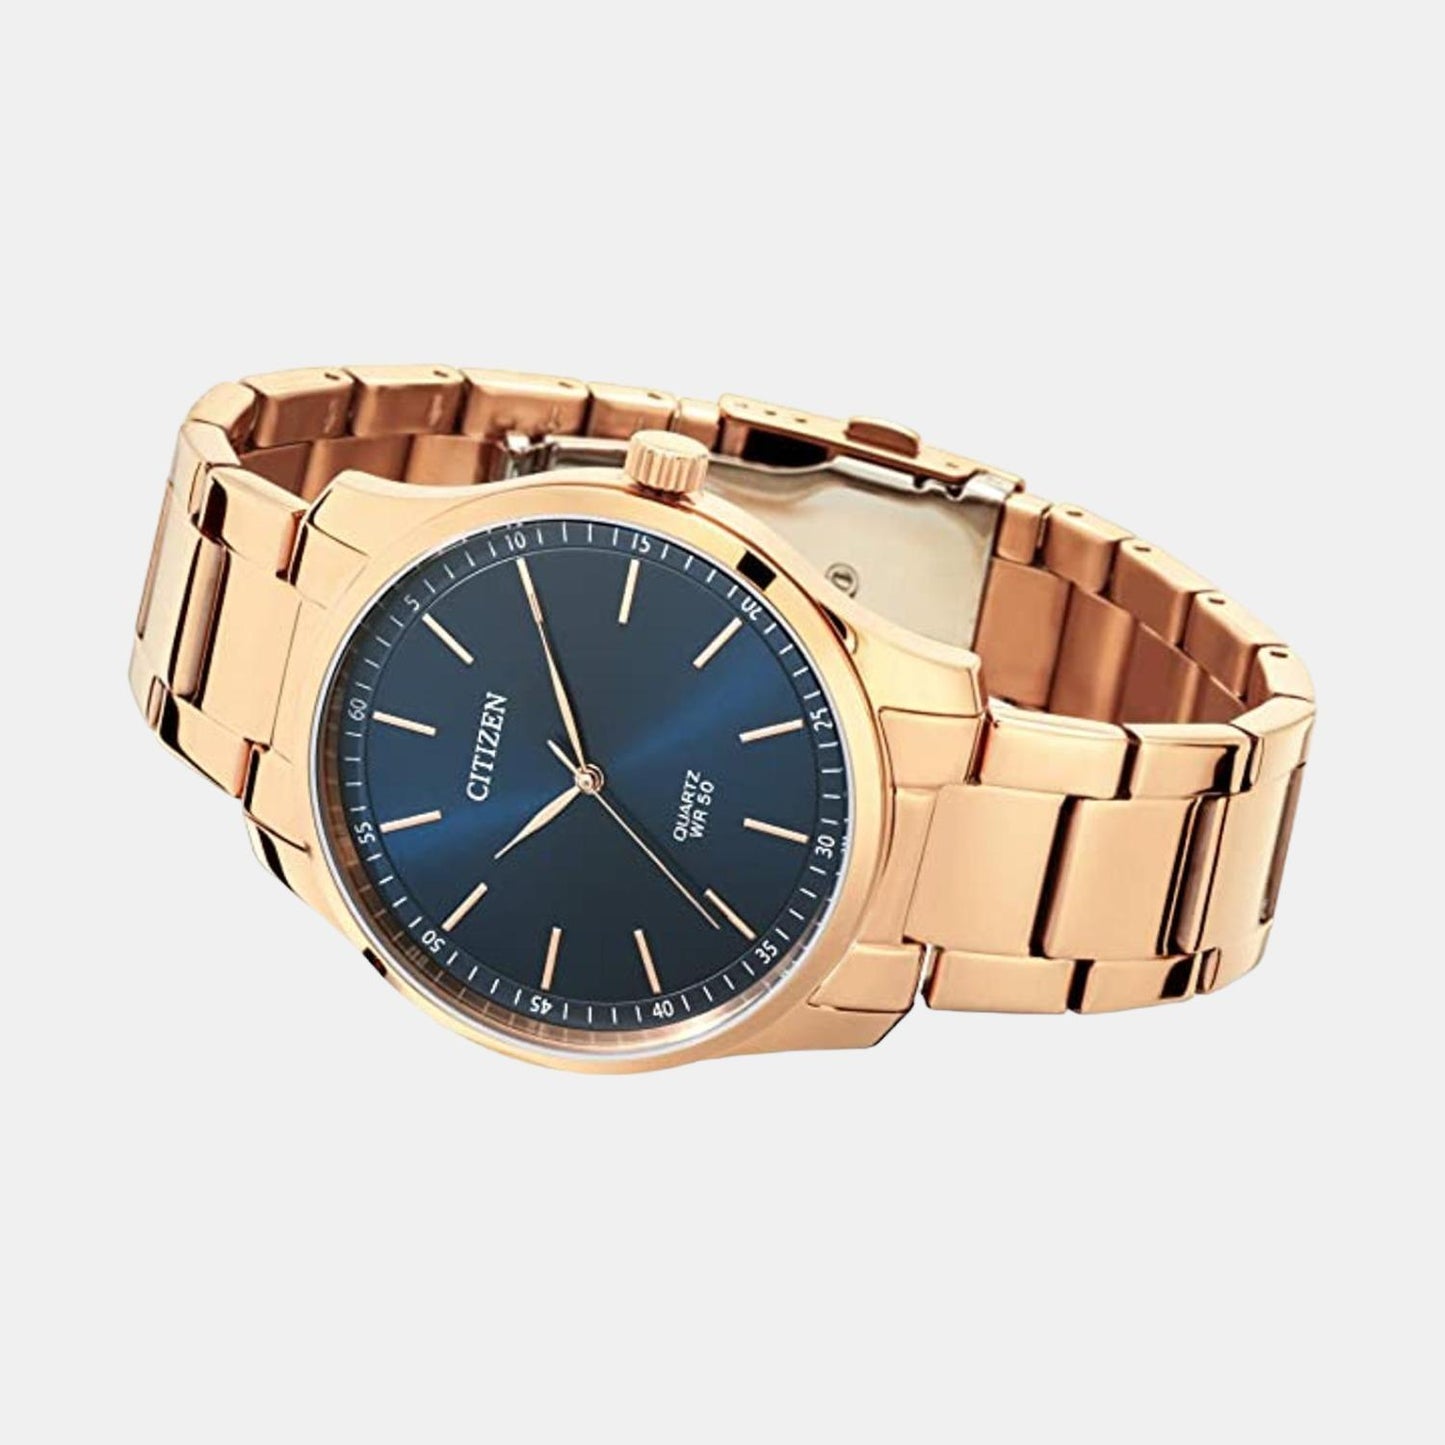 Male Blue Analog Stainless Steel Watch BH5003-51L